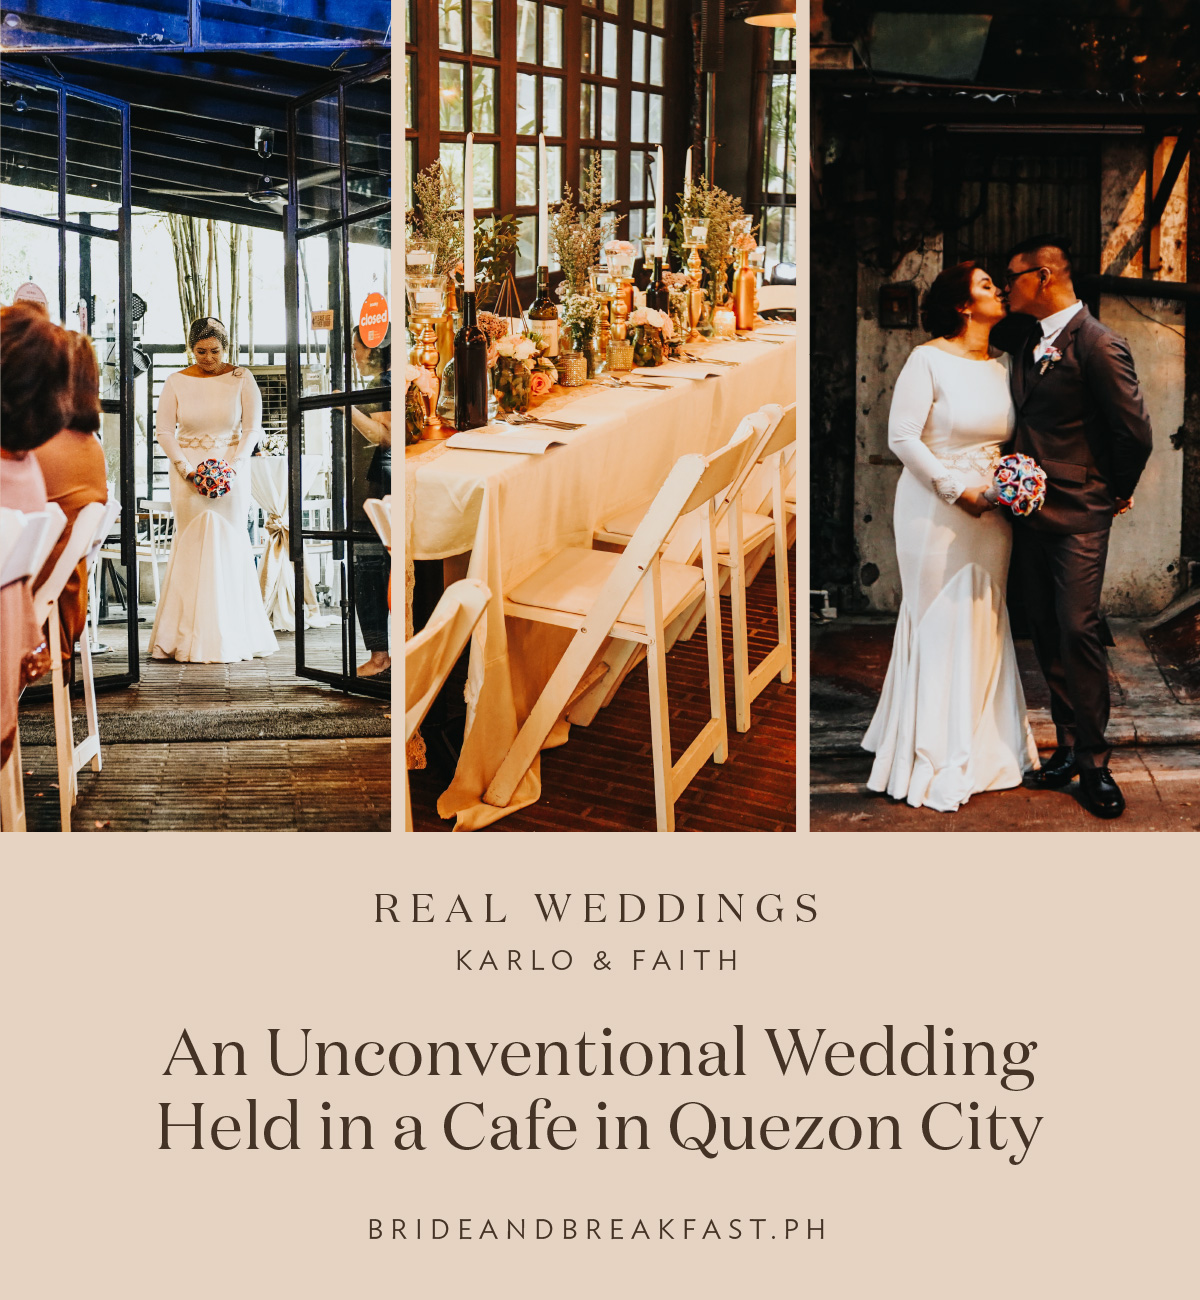 An Unconventional Wedding Held in a Cafe in Quezon City